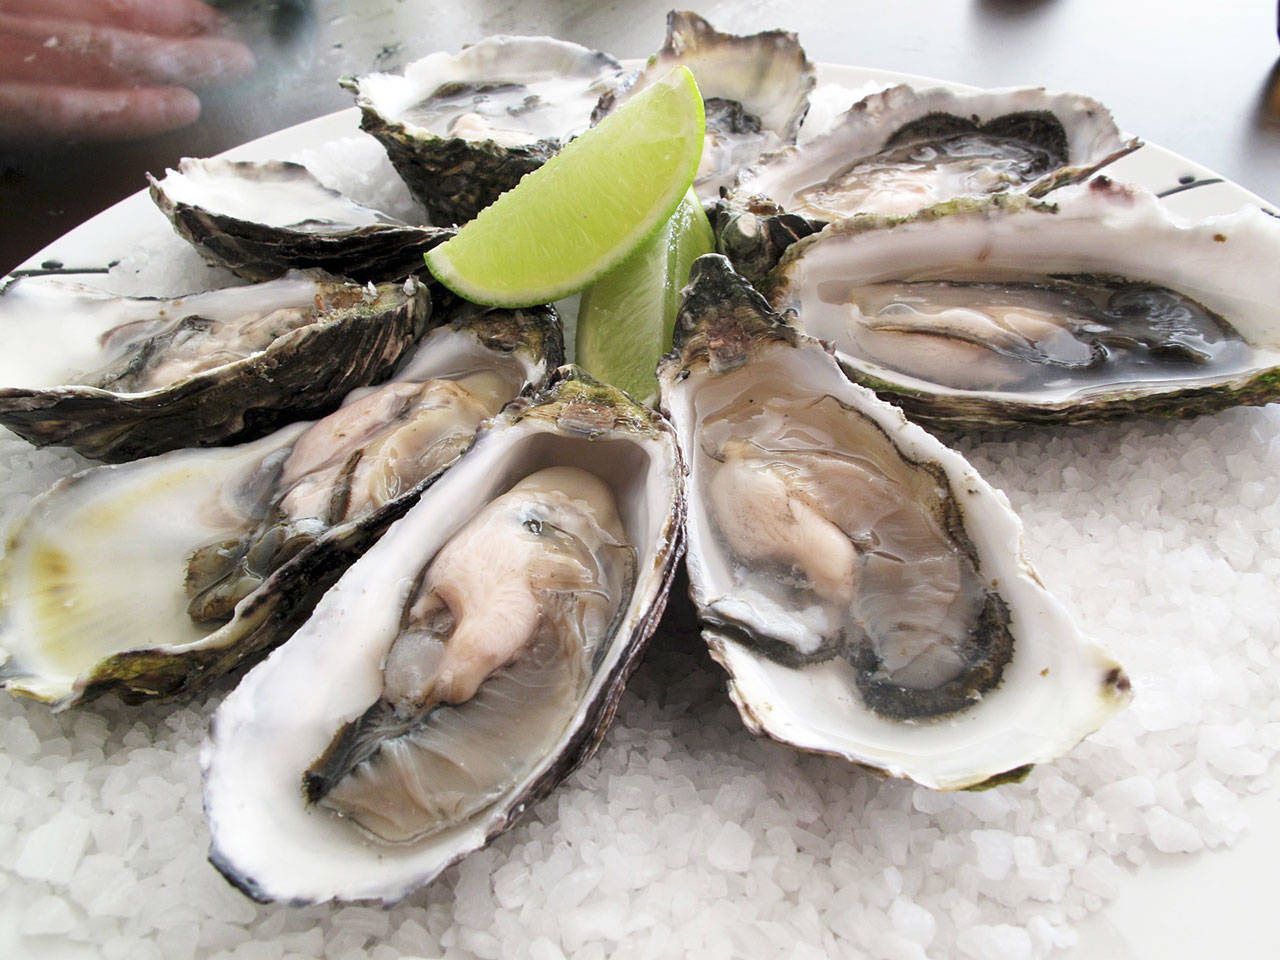 Sequim oysters will be on the menu for the first time at the annual Dungeness Crab & Seafood Festival this weekend. (Wikipedia)